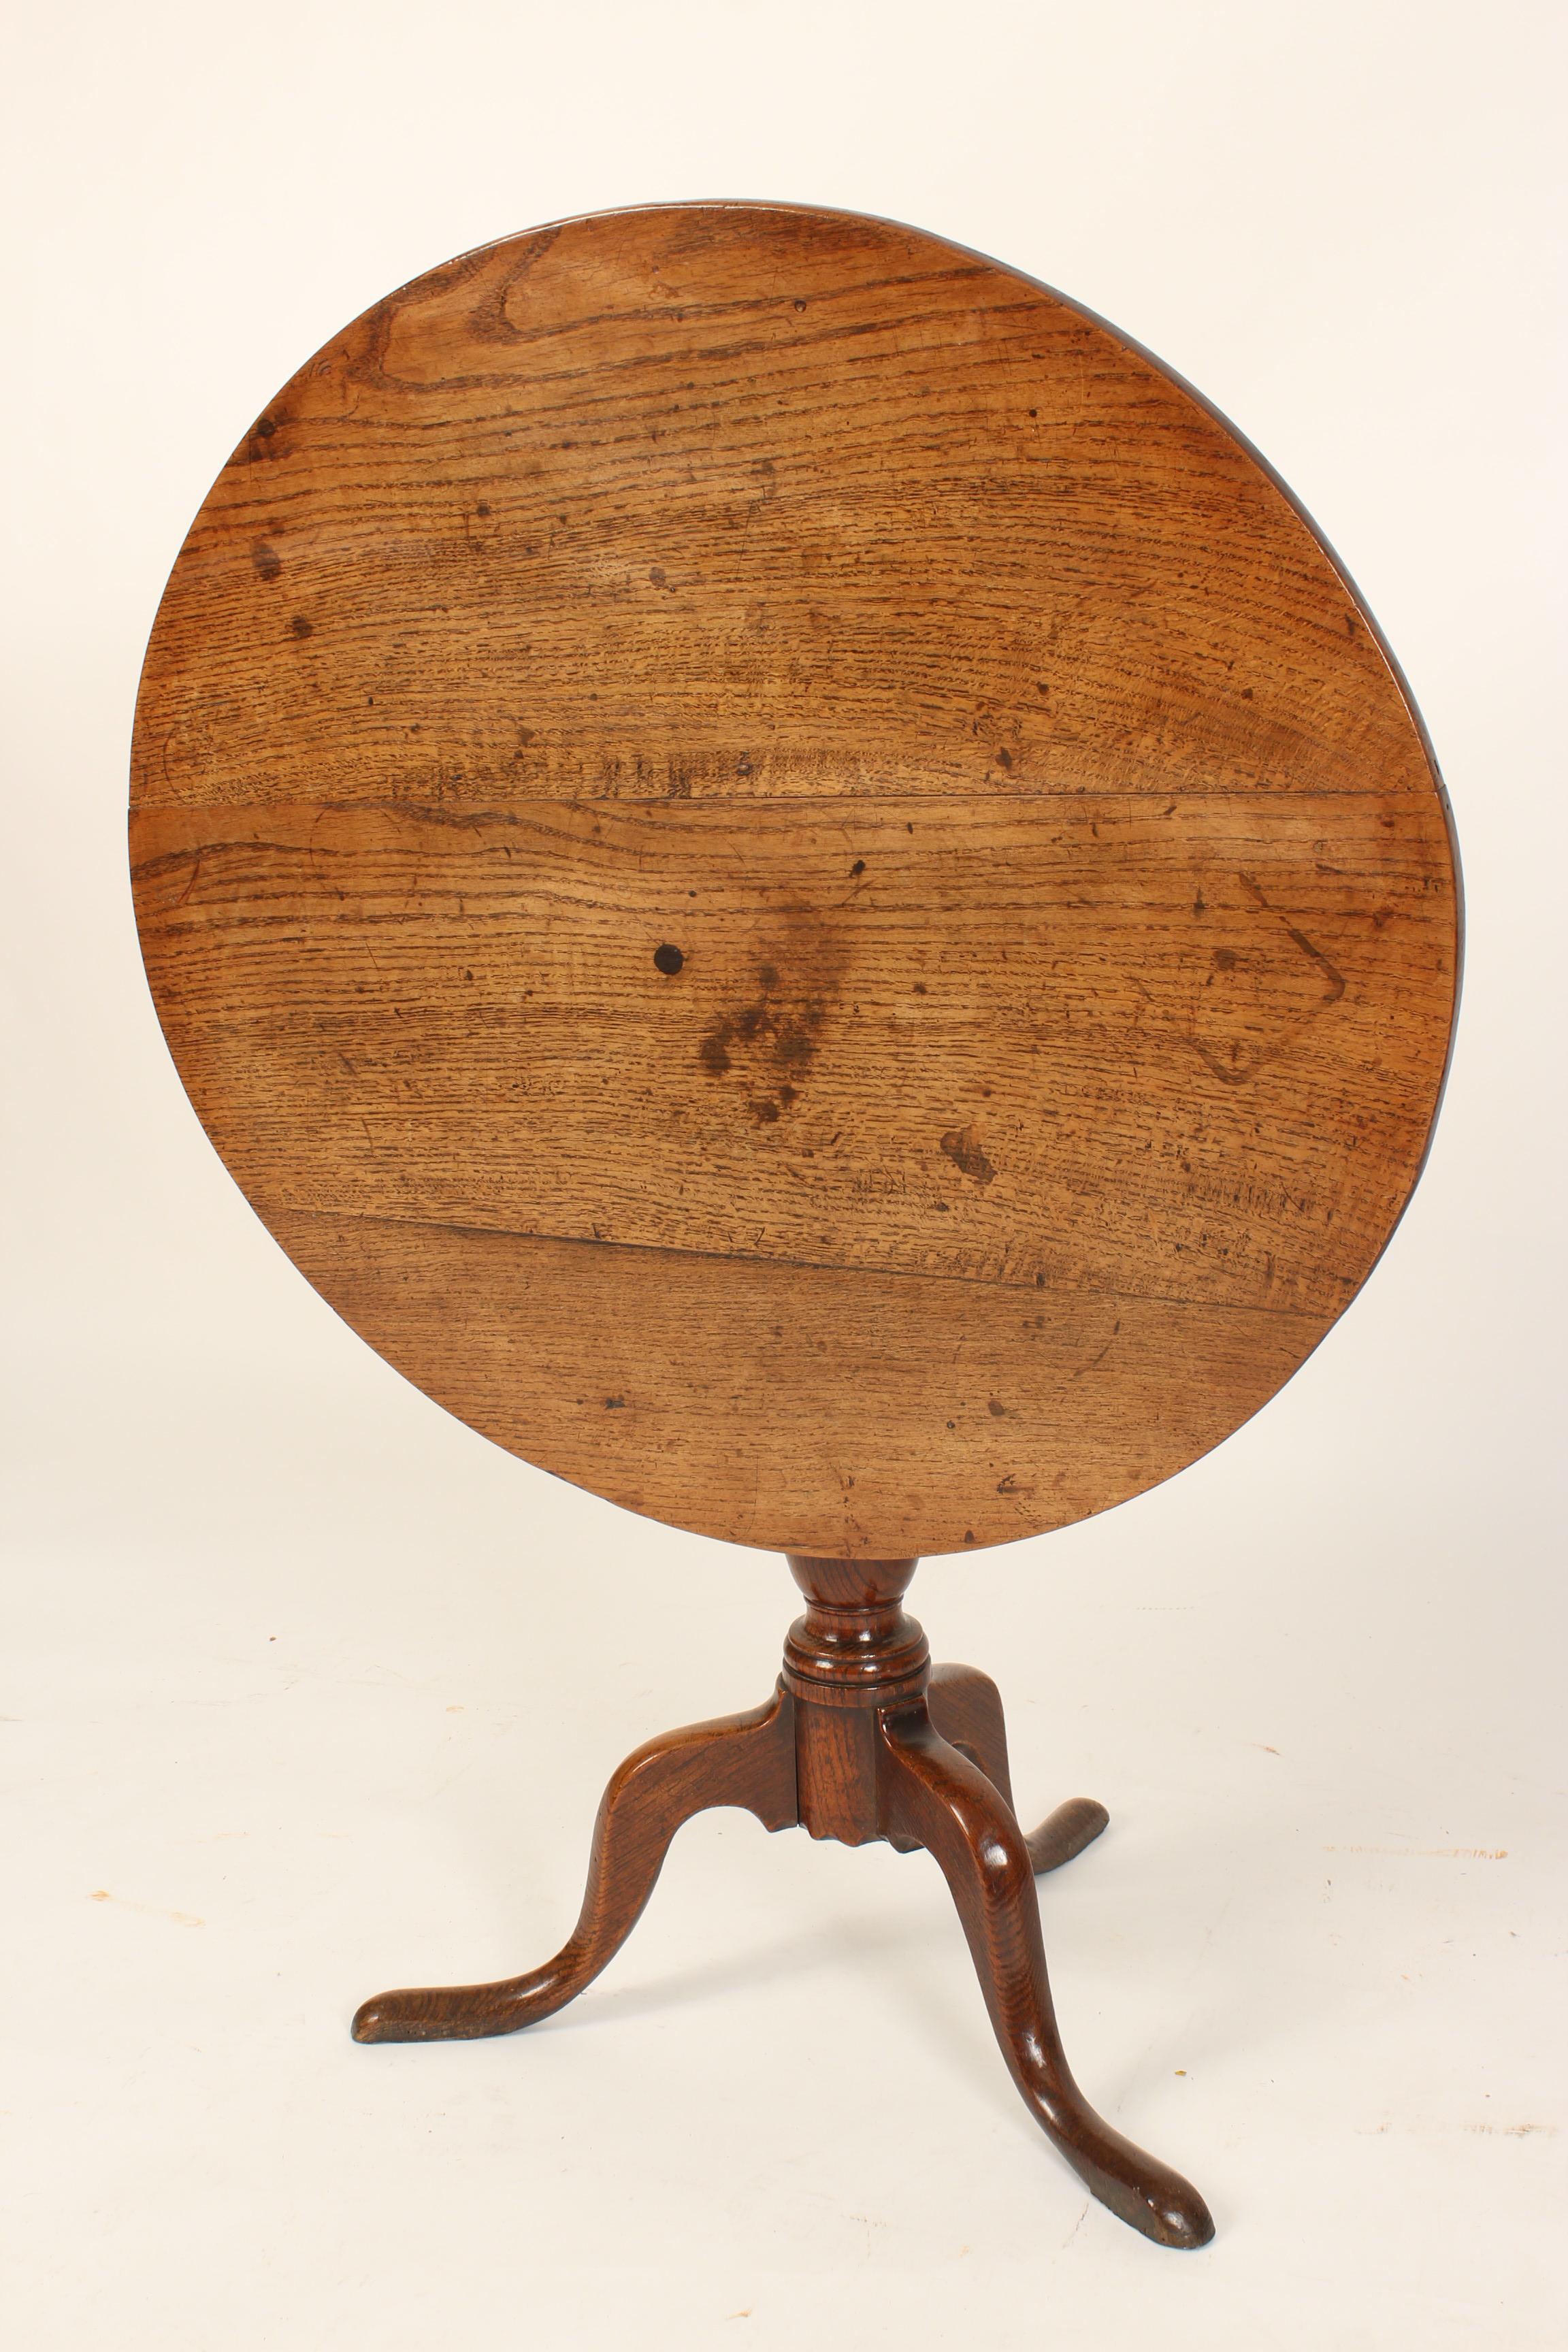 George III oak tilt top table, circa 1780. This table has a nice old patina. The table was formerly sold by Richard Gould Antiques, Santa Monica, Calif. Height when the tilt top is raised 44.5